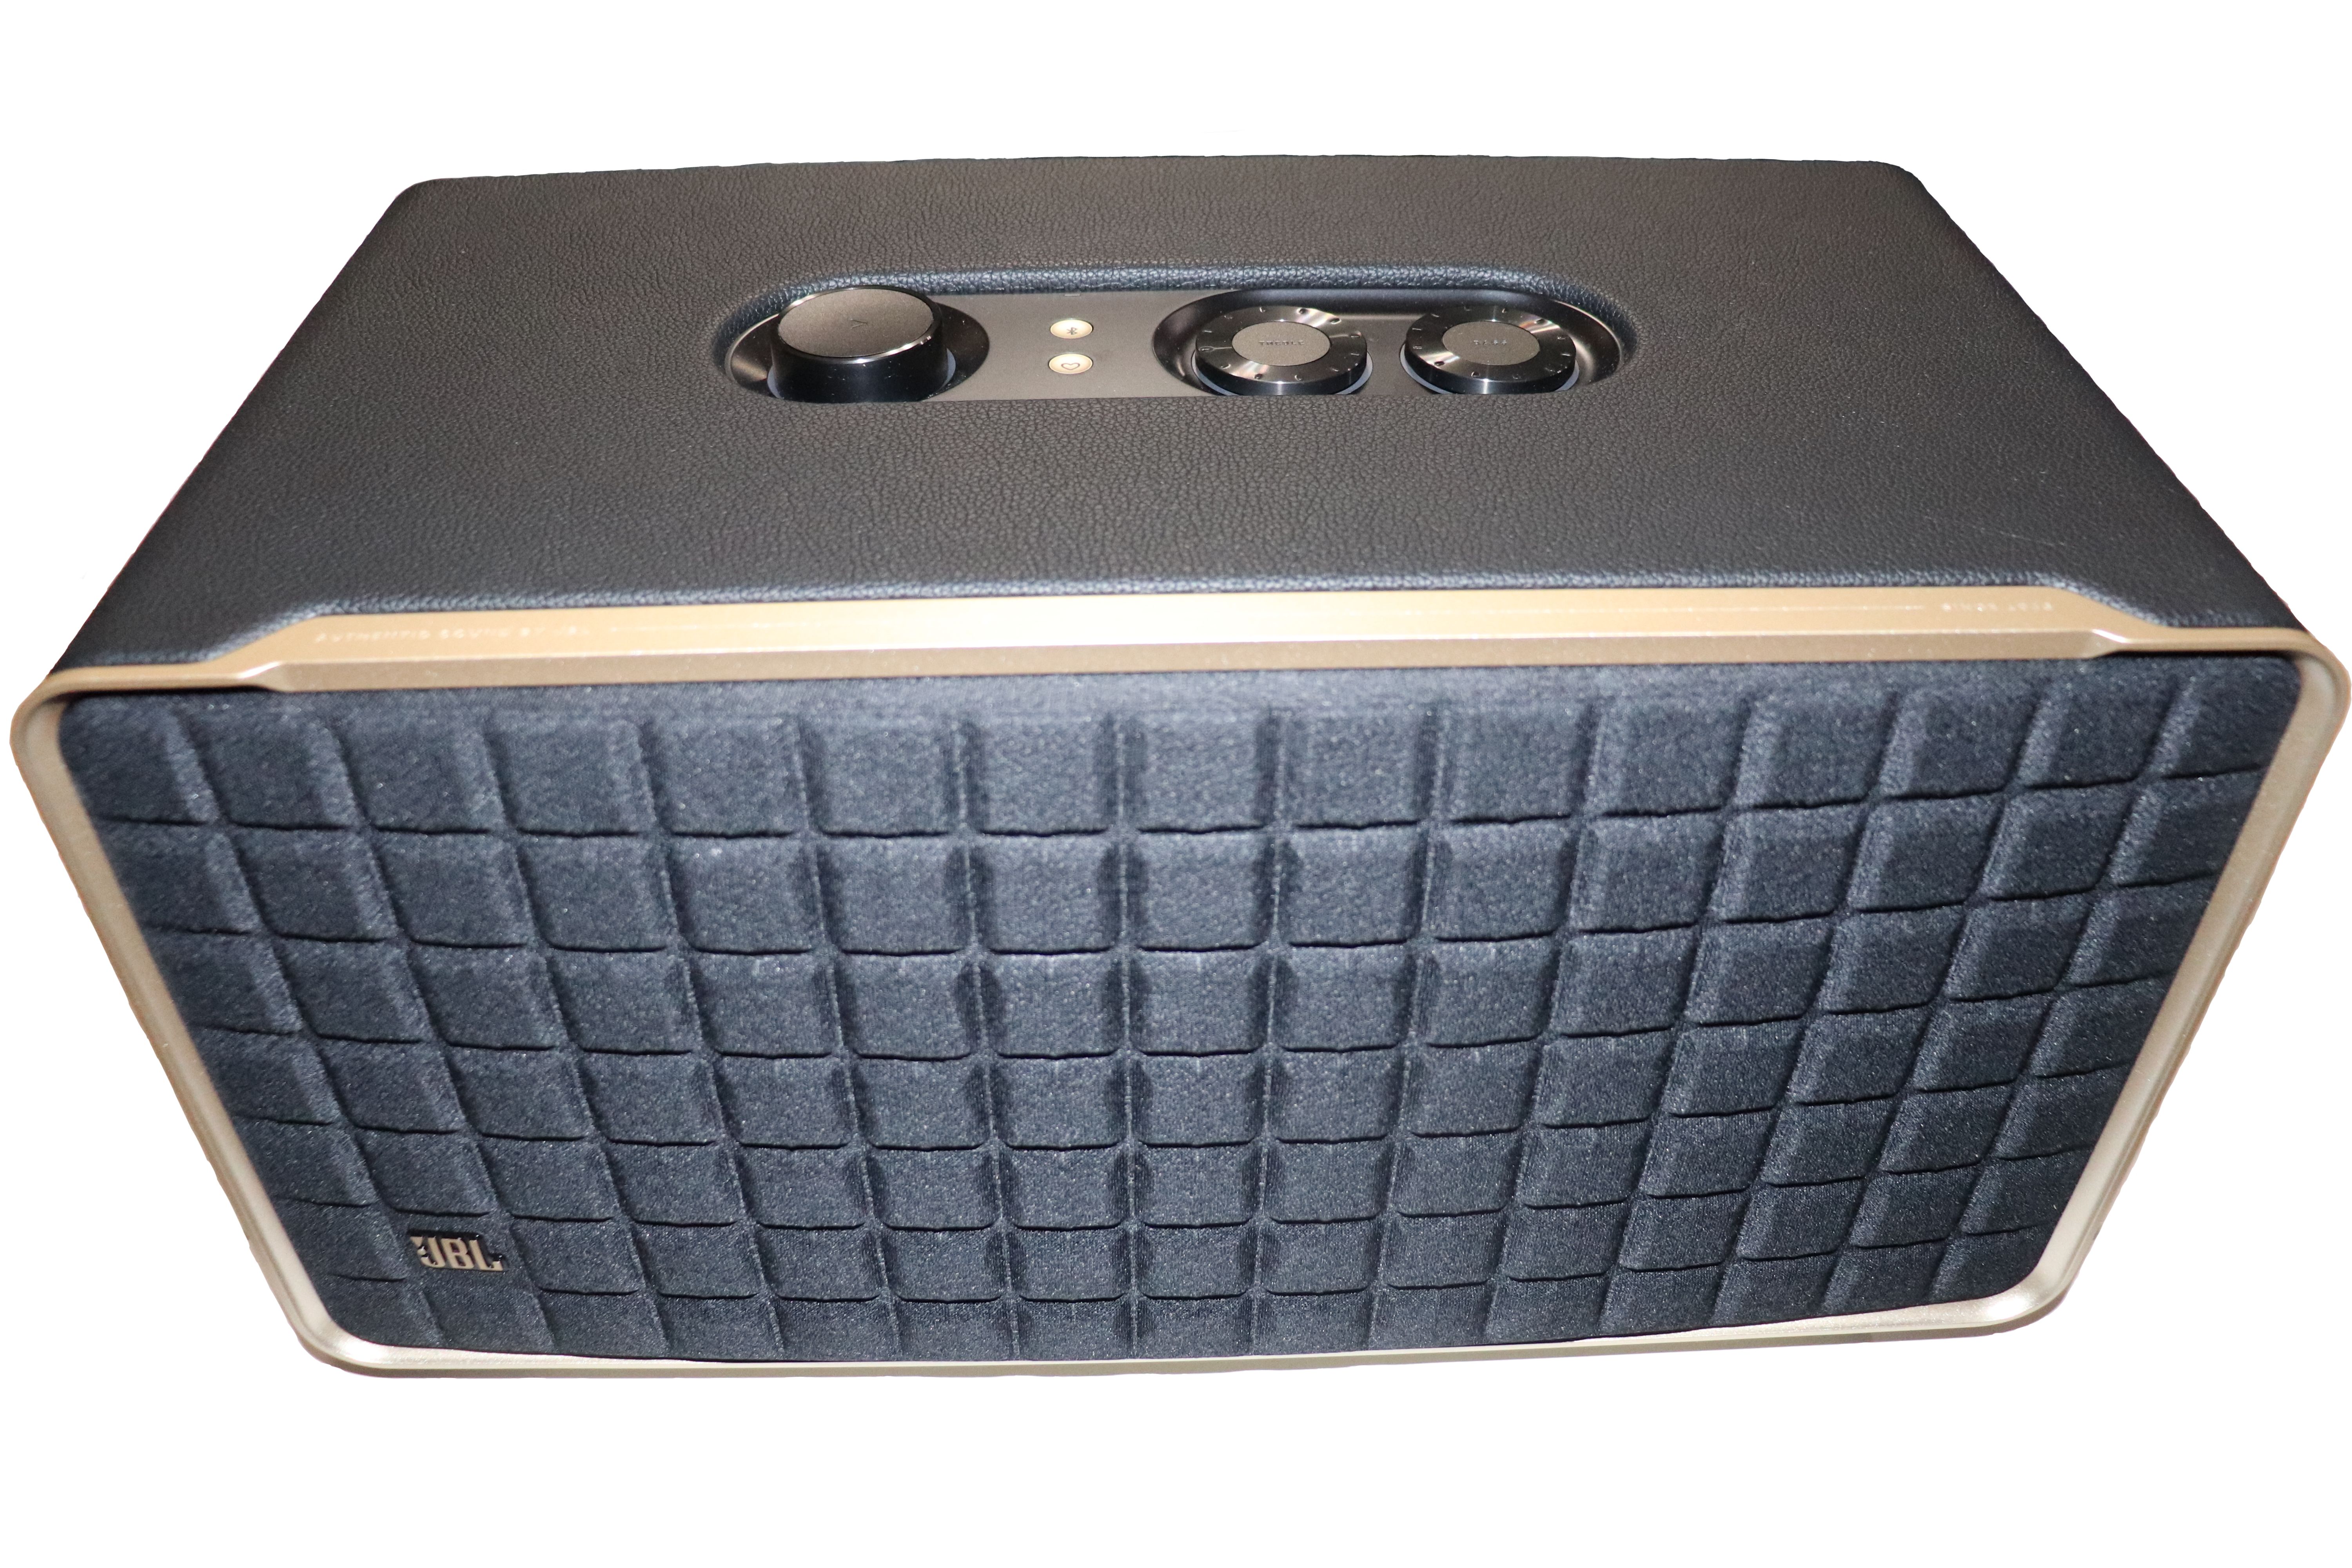 Plus: JBL 500 Stereowise Smart Wireless Speaker Authentics Review